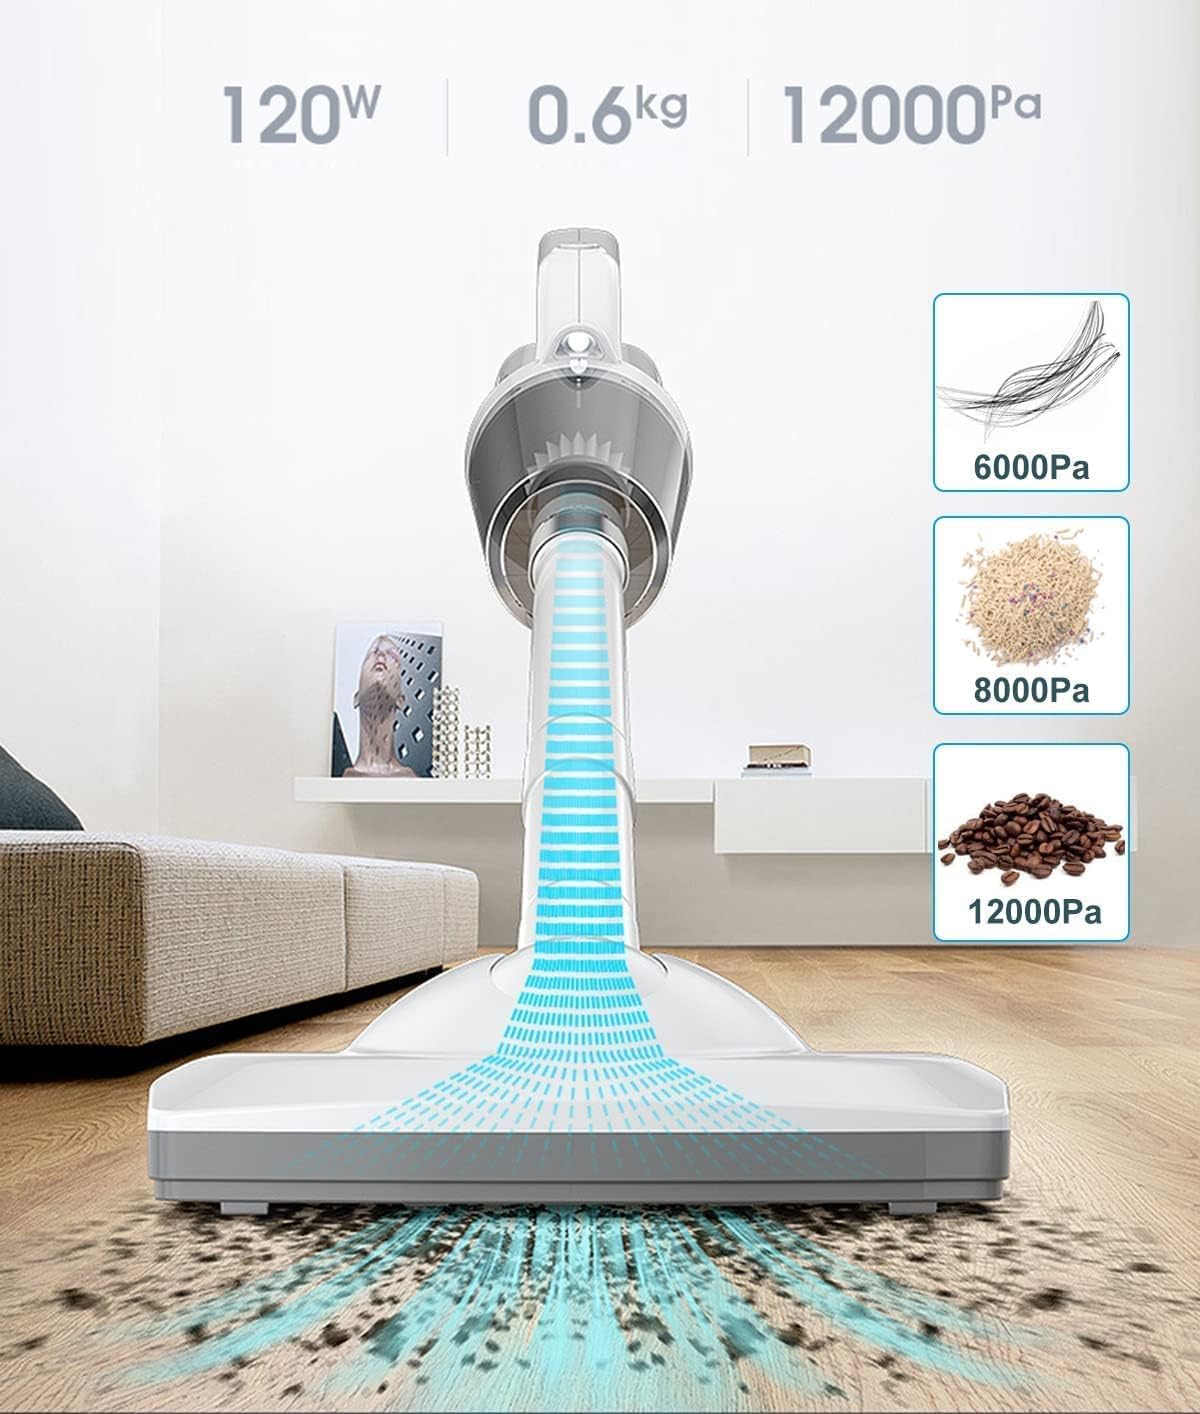 TDOO Cordless Vacuum Cleaner, 12000Pa Powerful Cordless Vacuum 4 in 1, 35Mins Long Runtime, Lightweight & Ultra-Quiet Stick Vacuum for Hardwood Floor Carpet Pet Car Cleaning